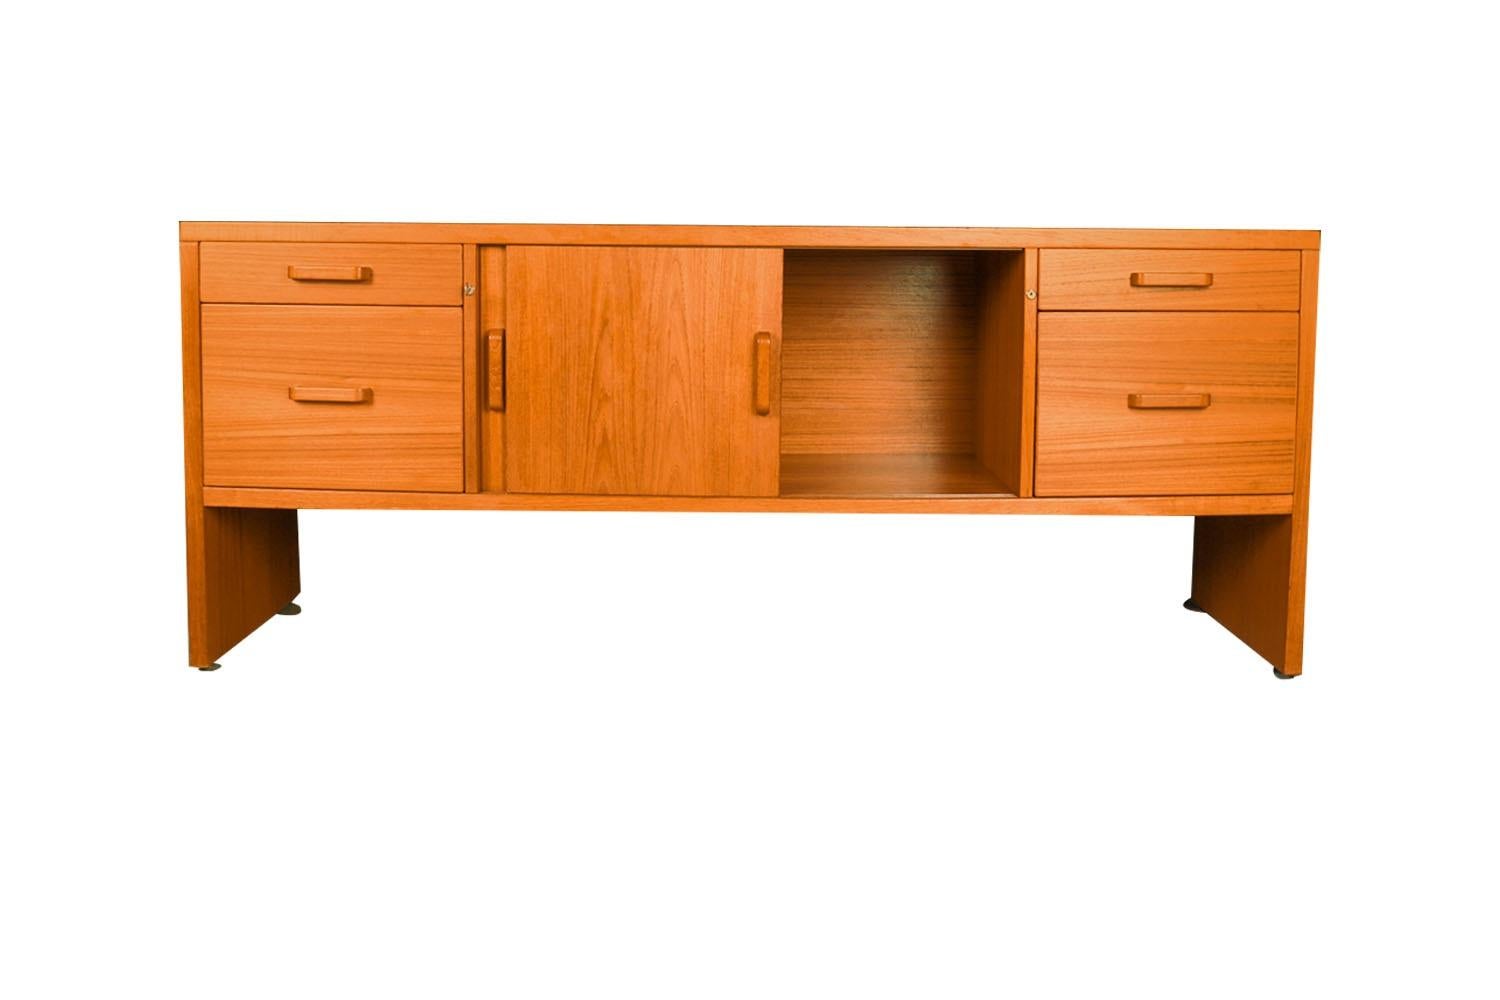 An exceptional teak file cabinet/credenza circa 1970's, made in Denmark. This absolutely stunning piece features a sliding double door cabinet with finished teak interior and spacious storage in the center flanked by two deep spacious file drawers